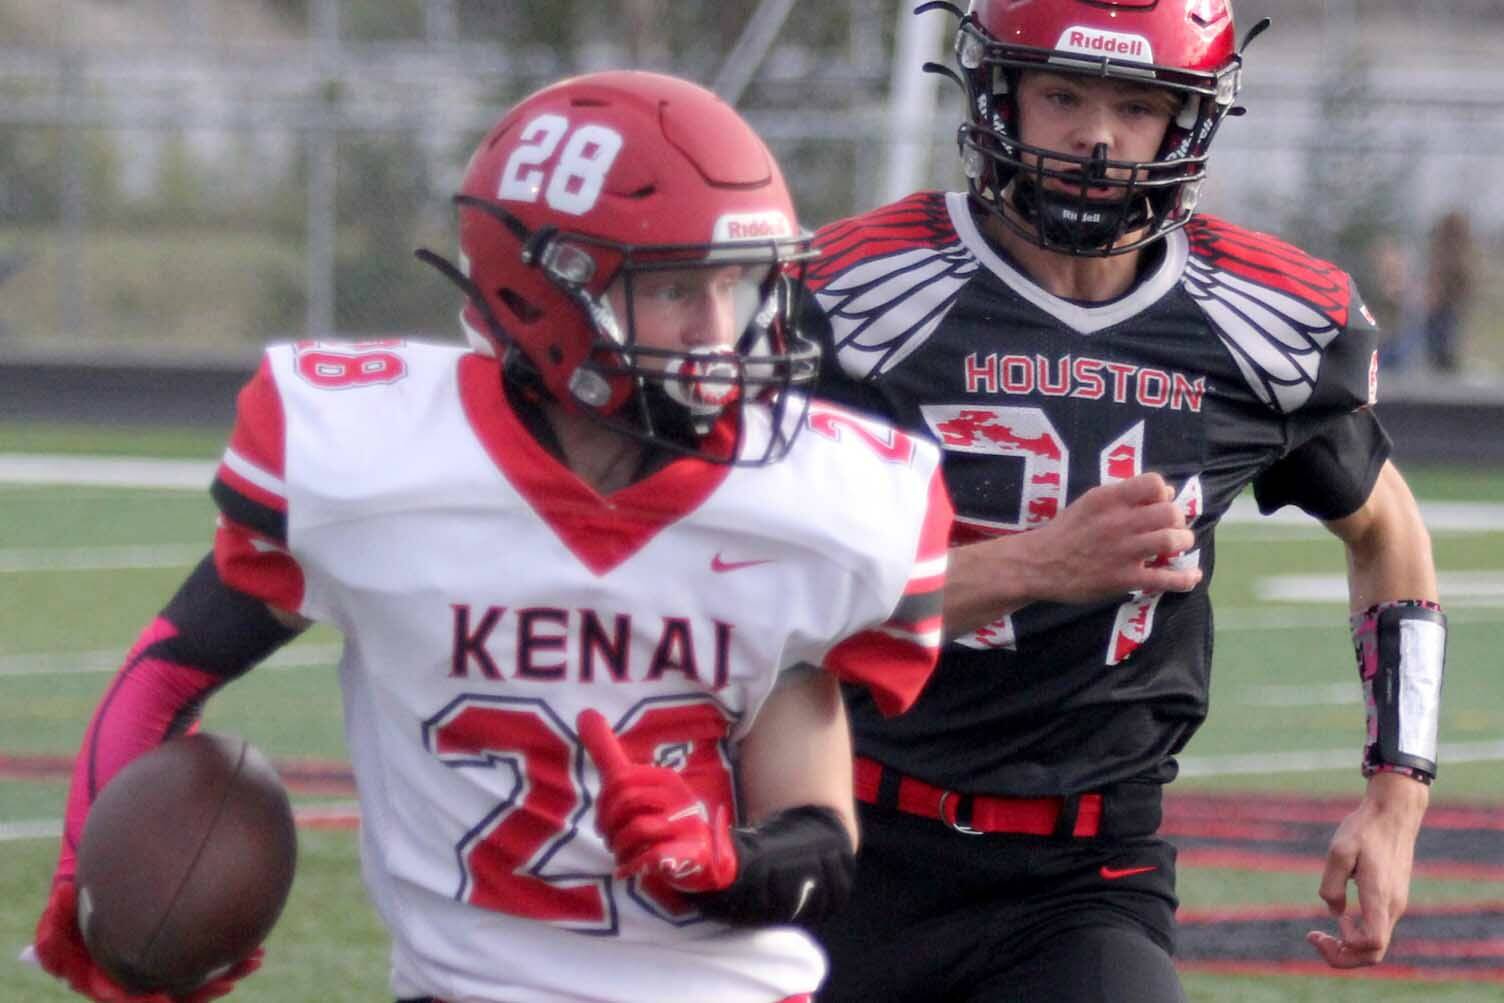 Kenai’s James Sparks runs for a gain after a catch during a loss to Houston on Friday, Sept. 3, 2021, in Houston, Alaska. (Photo by Jeremiah Bartz/Frontiersman)